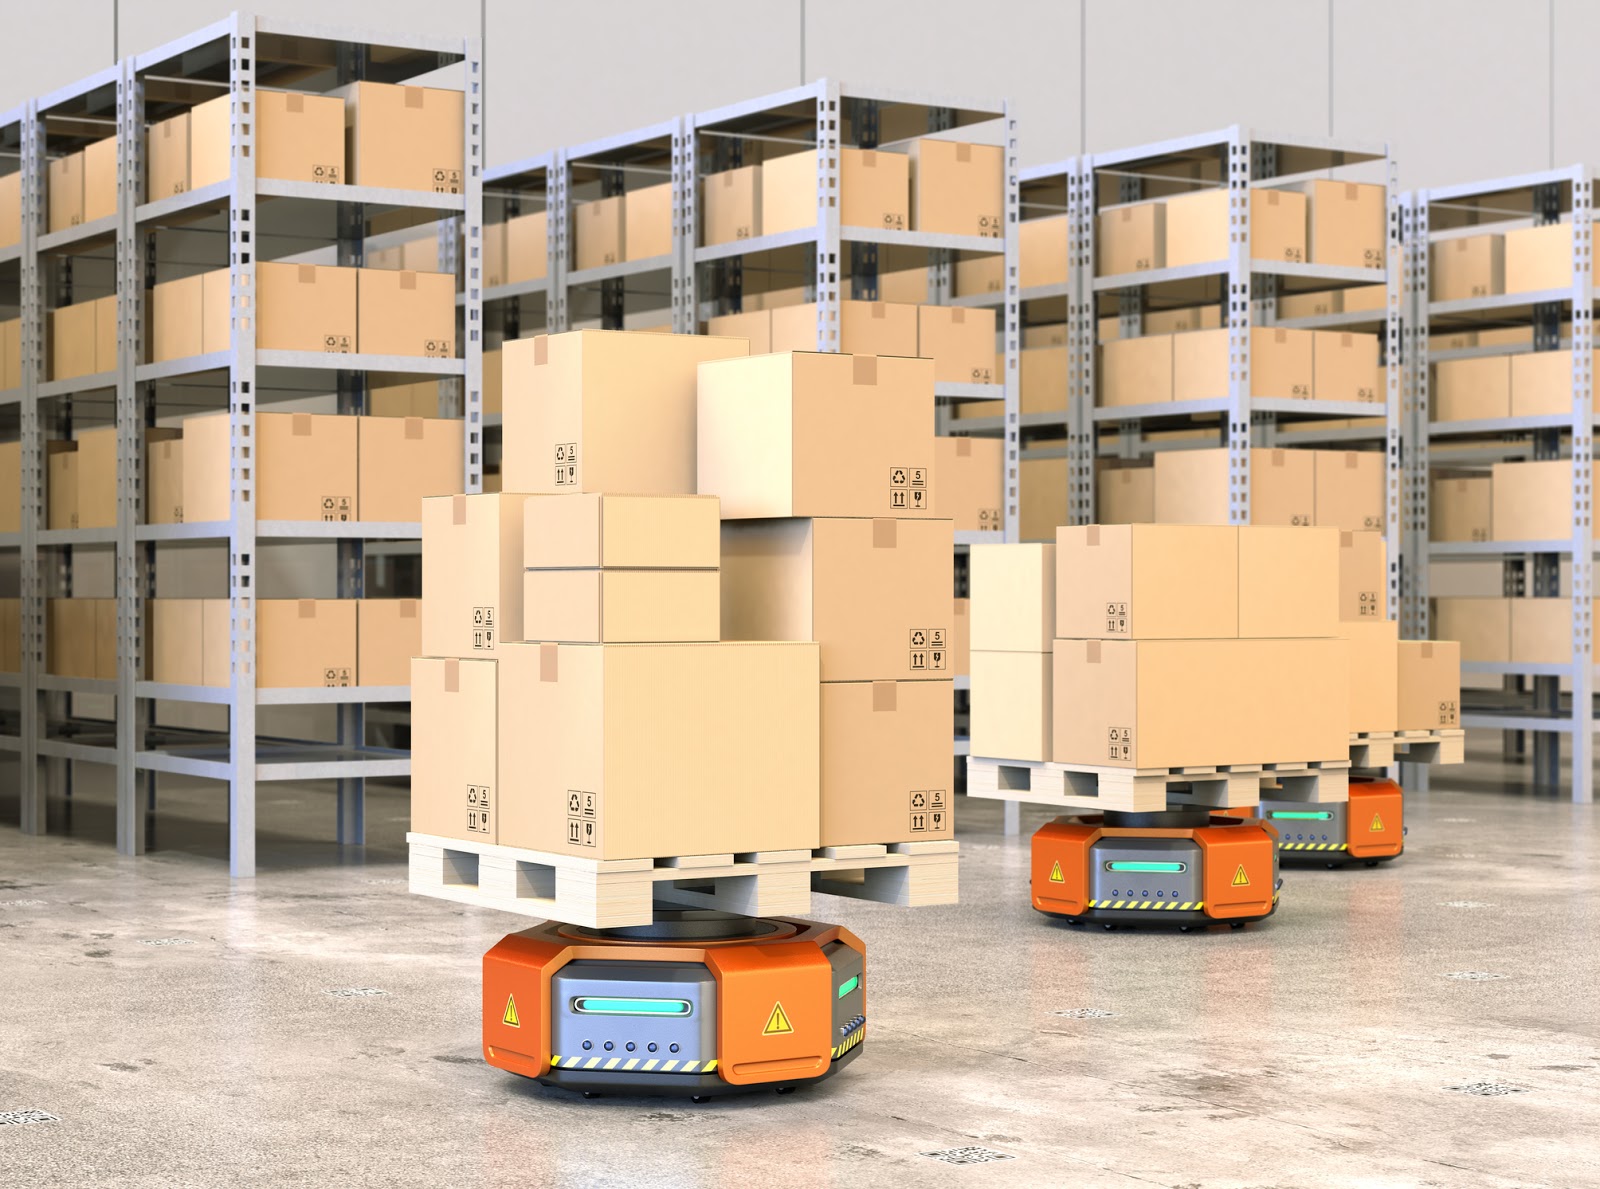 Self driving robots carrying boxes